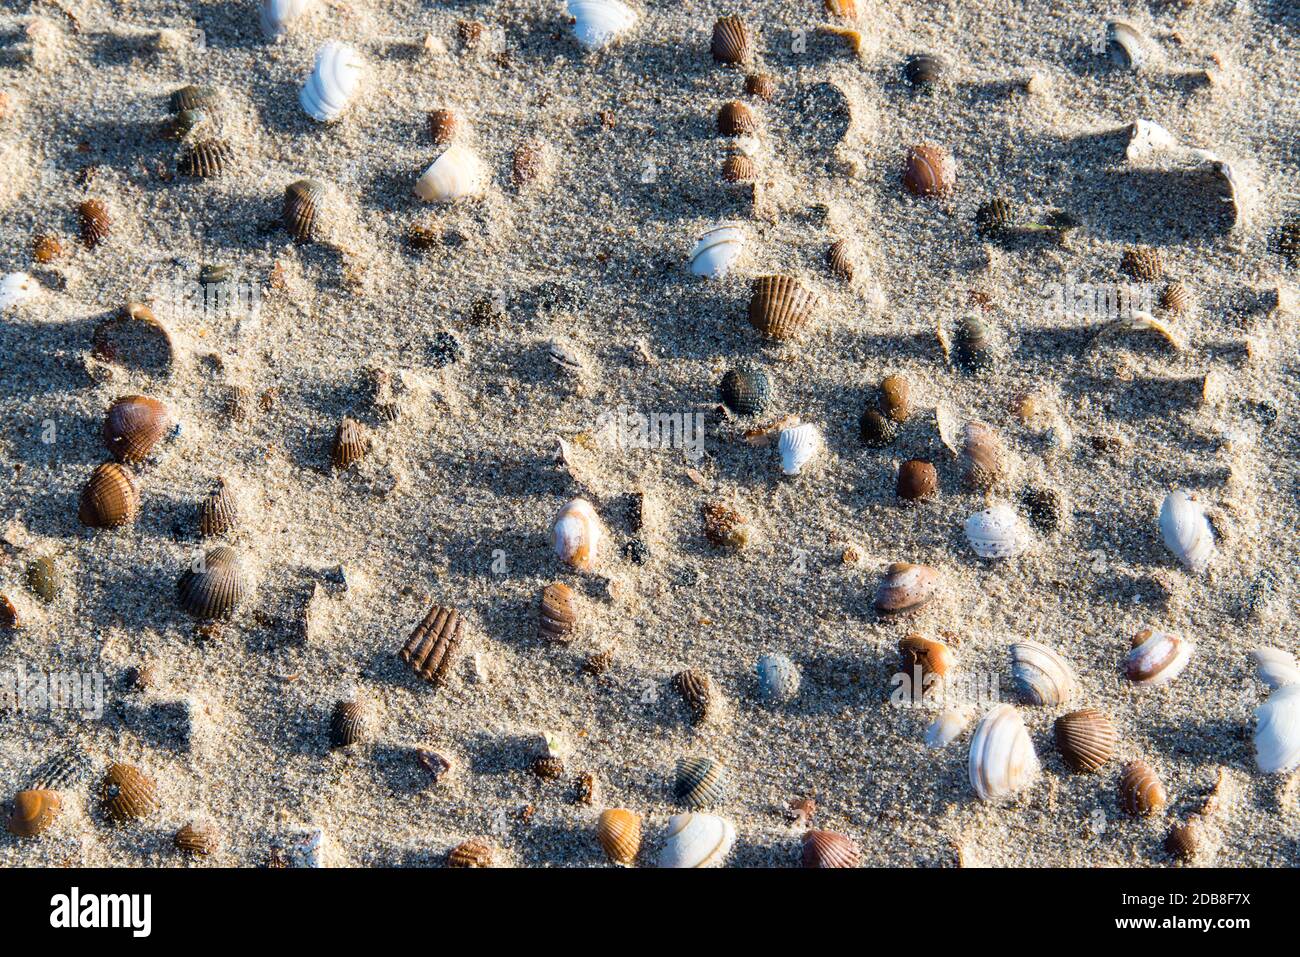 Strandgut High Resolution Stock Photography and Images - Alamy